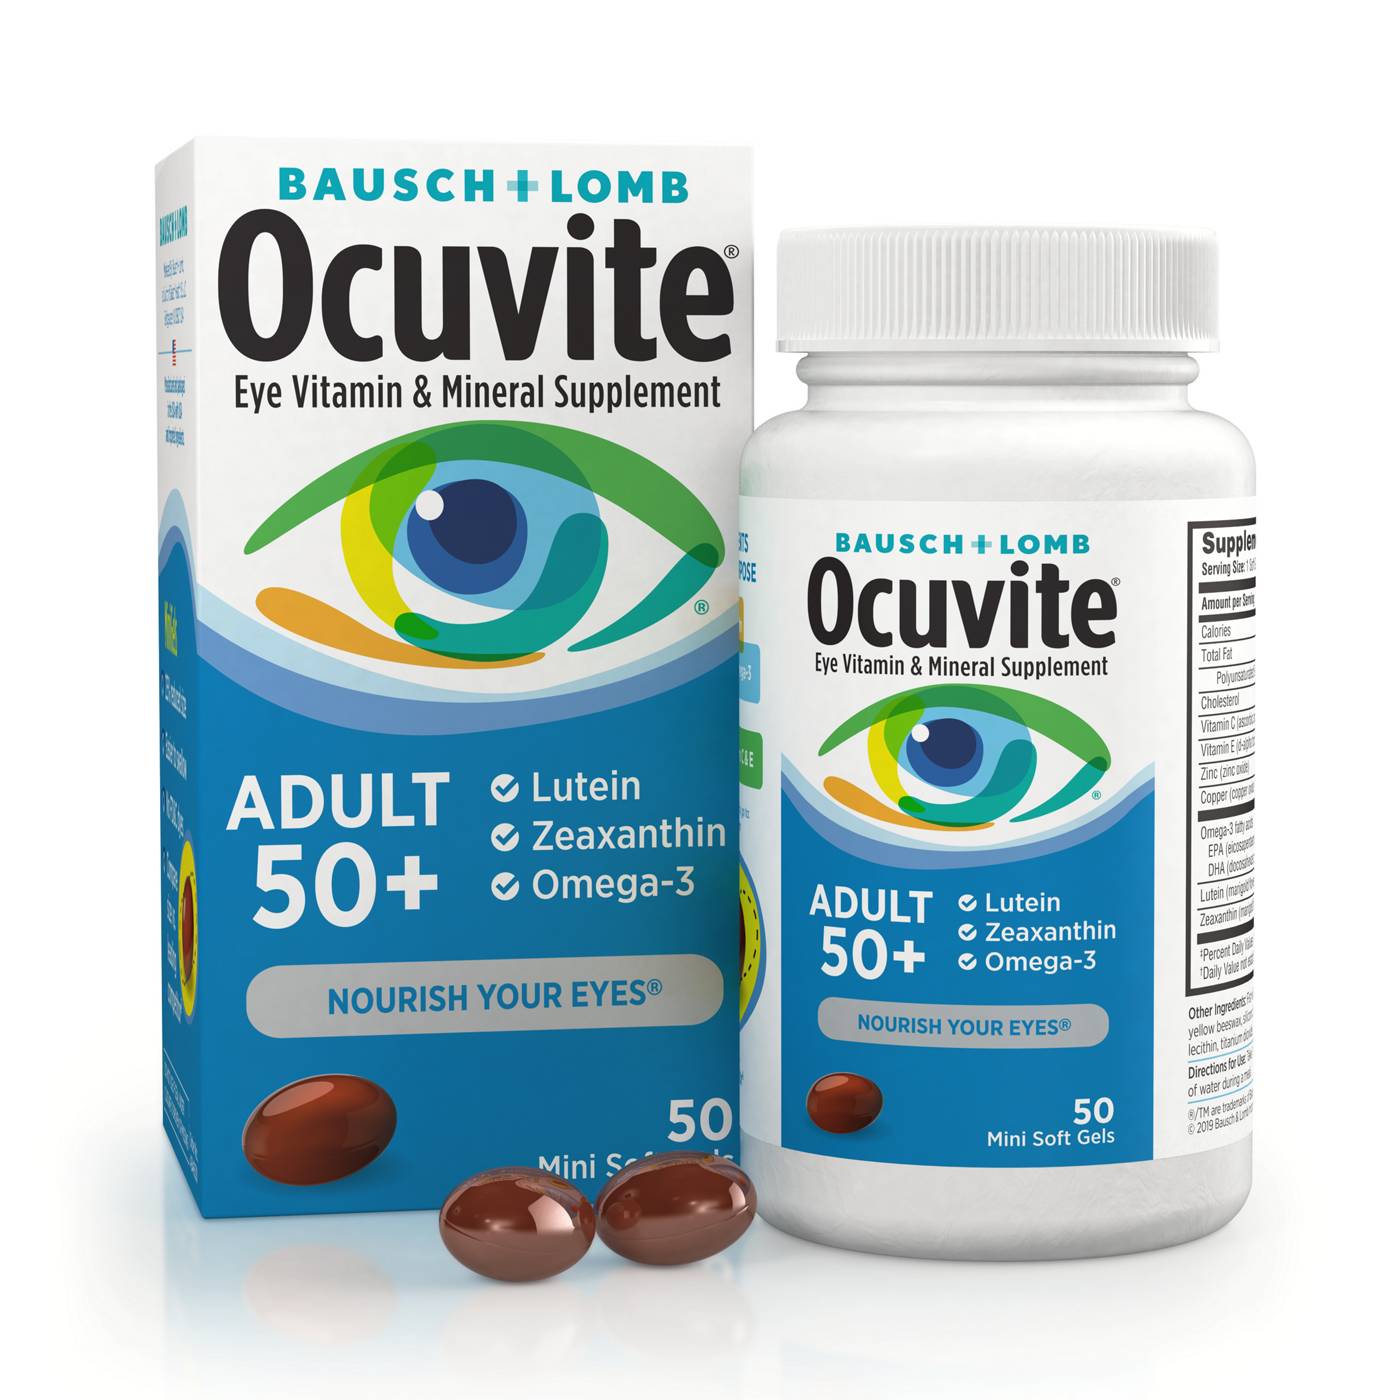 Bausch & Lomb Ocuvite Adult 50+ Eye Vitamin and Mineral Supplement Softgels; image 3 of 5